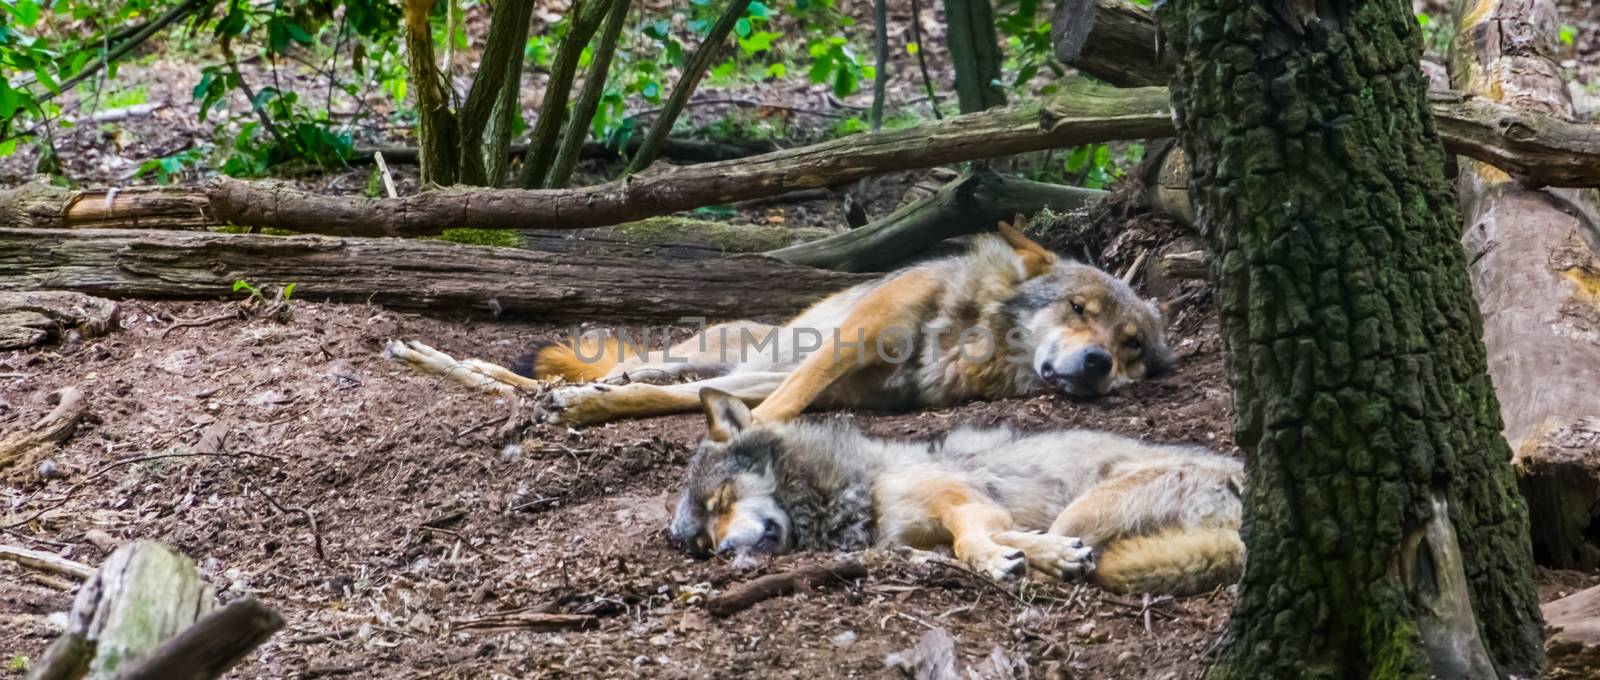 grey wolf couple laying on the ground together in the forest, Wild animal specie from the forests of Eurasia by charlottebleijenberg